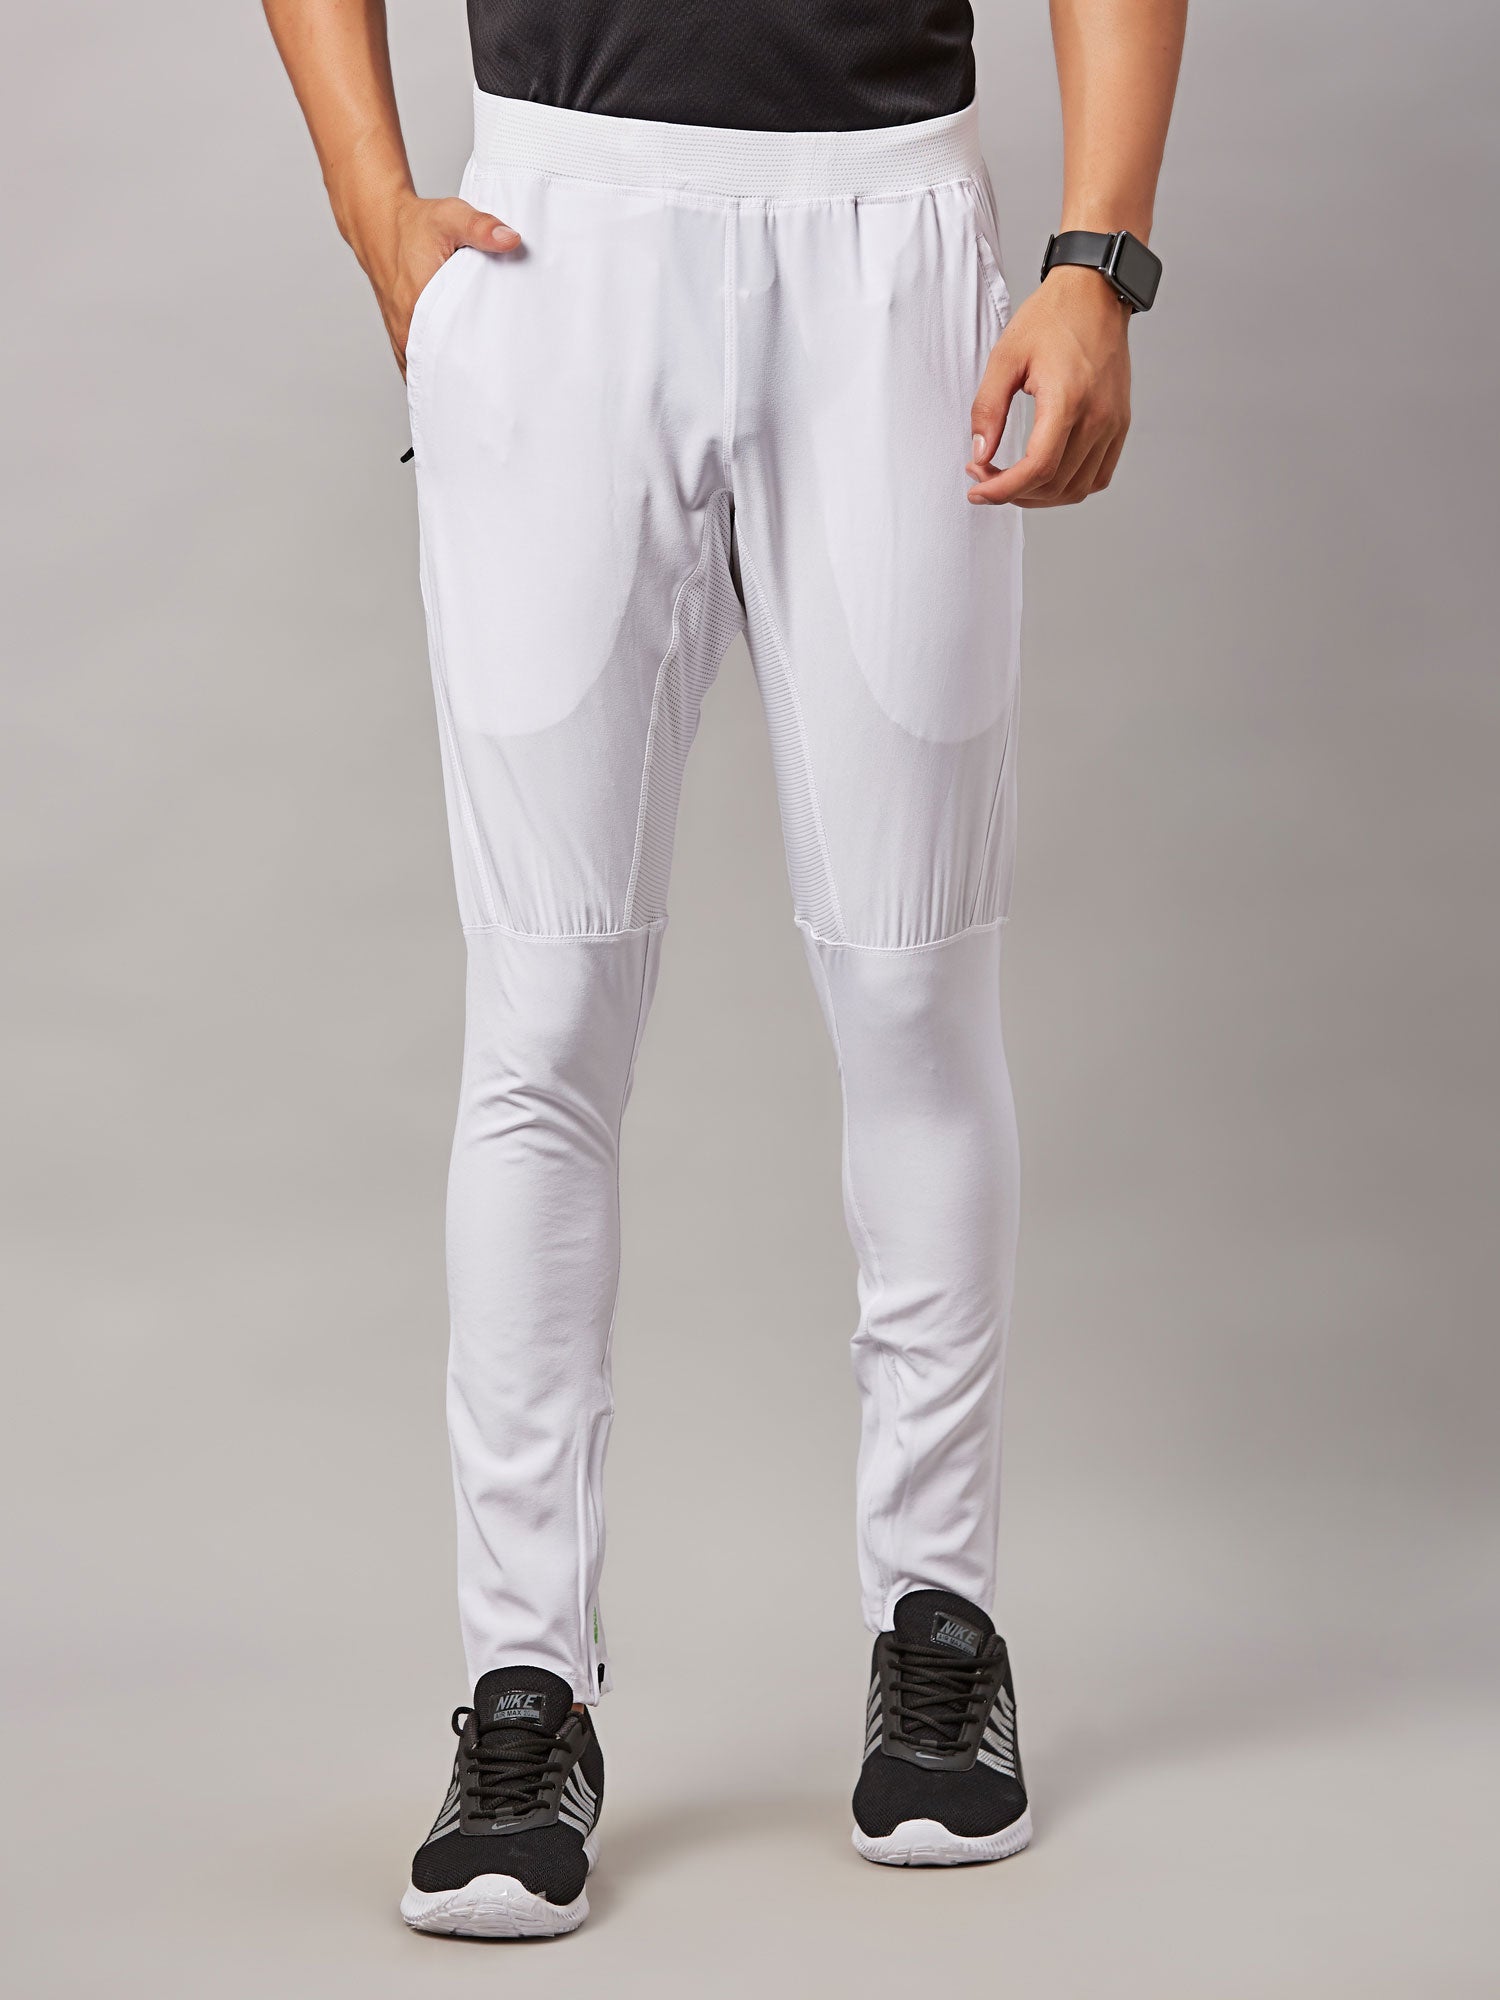 DYCA By Bodycare Mens Cotton Regular fit Track Pant DAA5086  Online  Shopping site in India